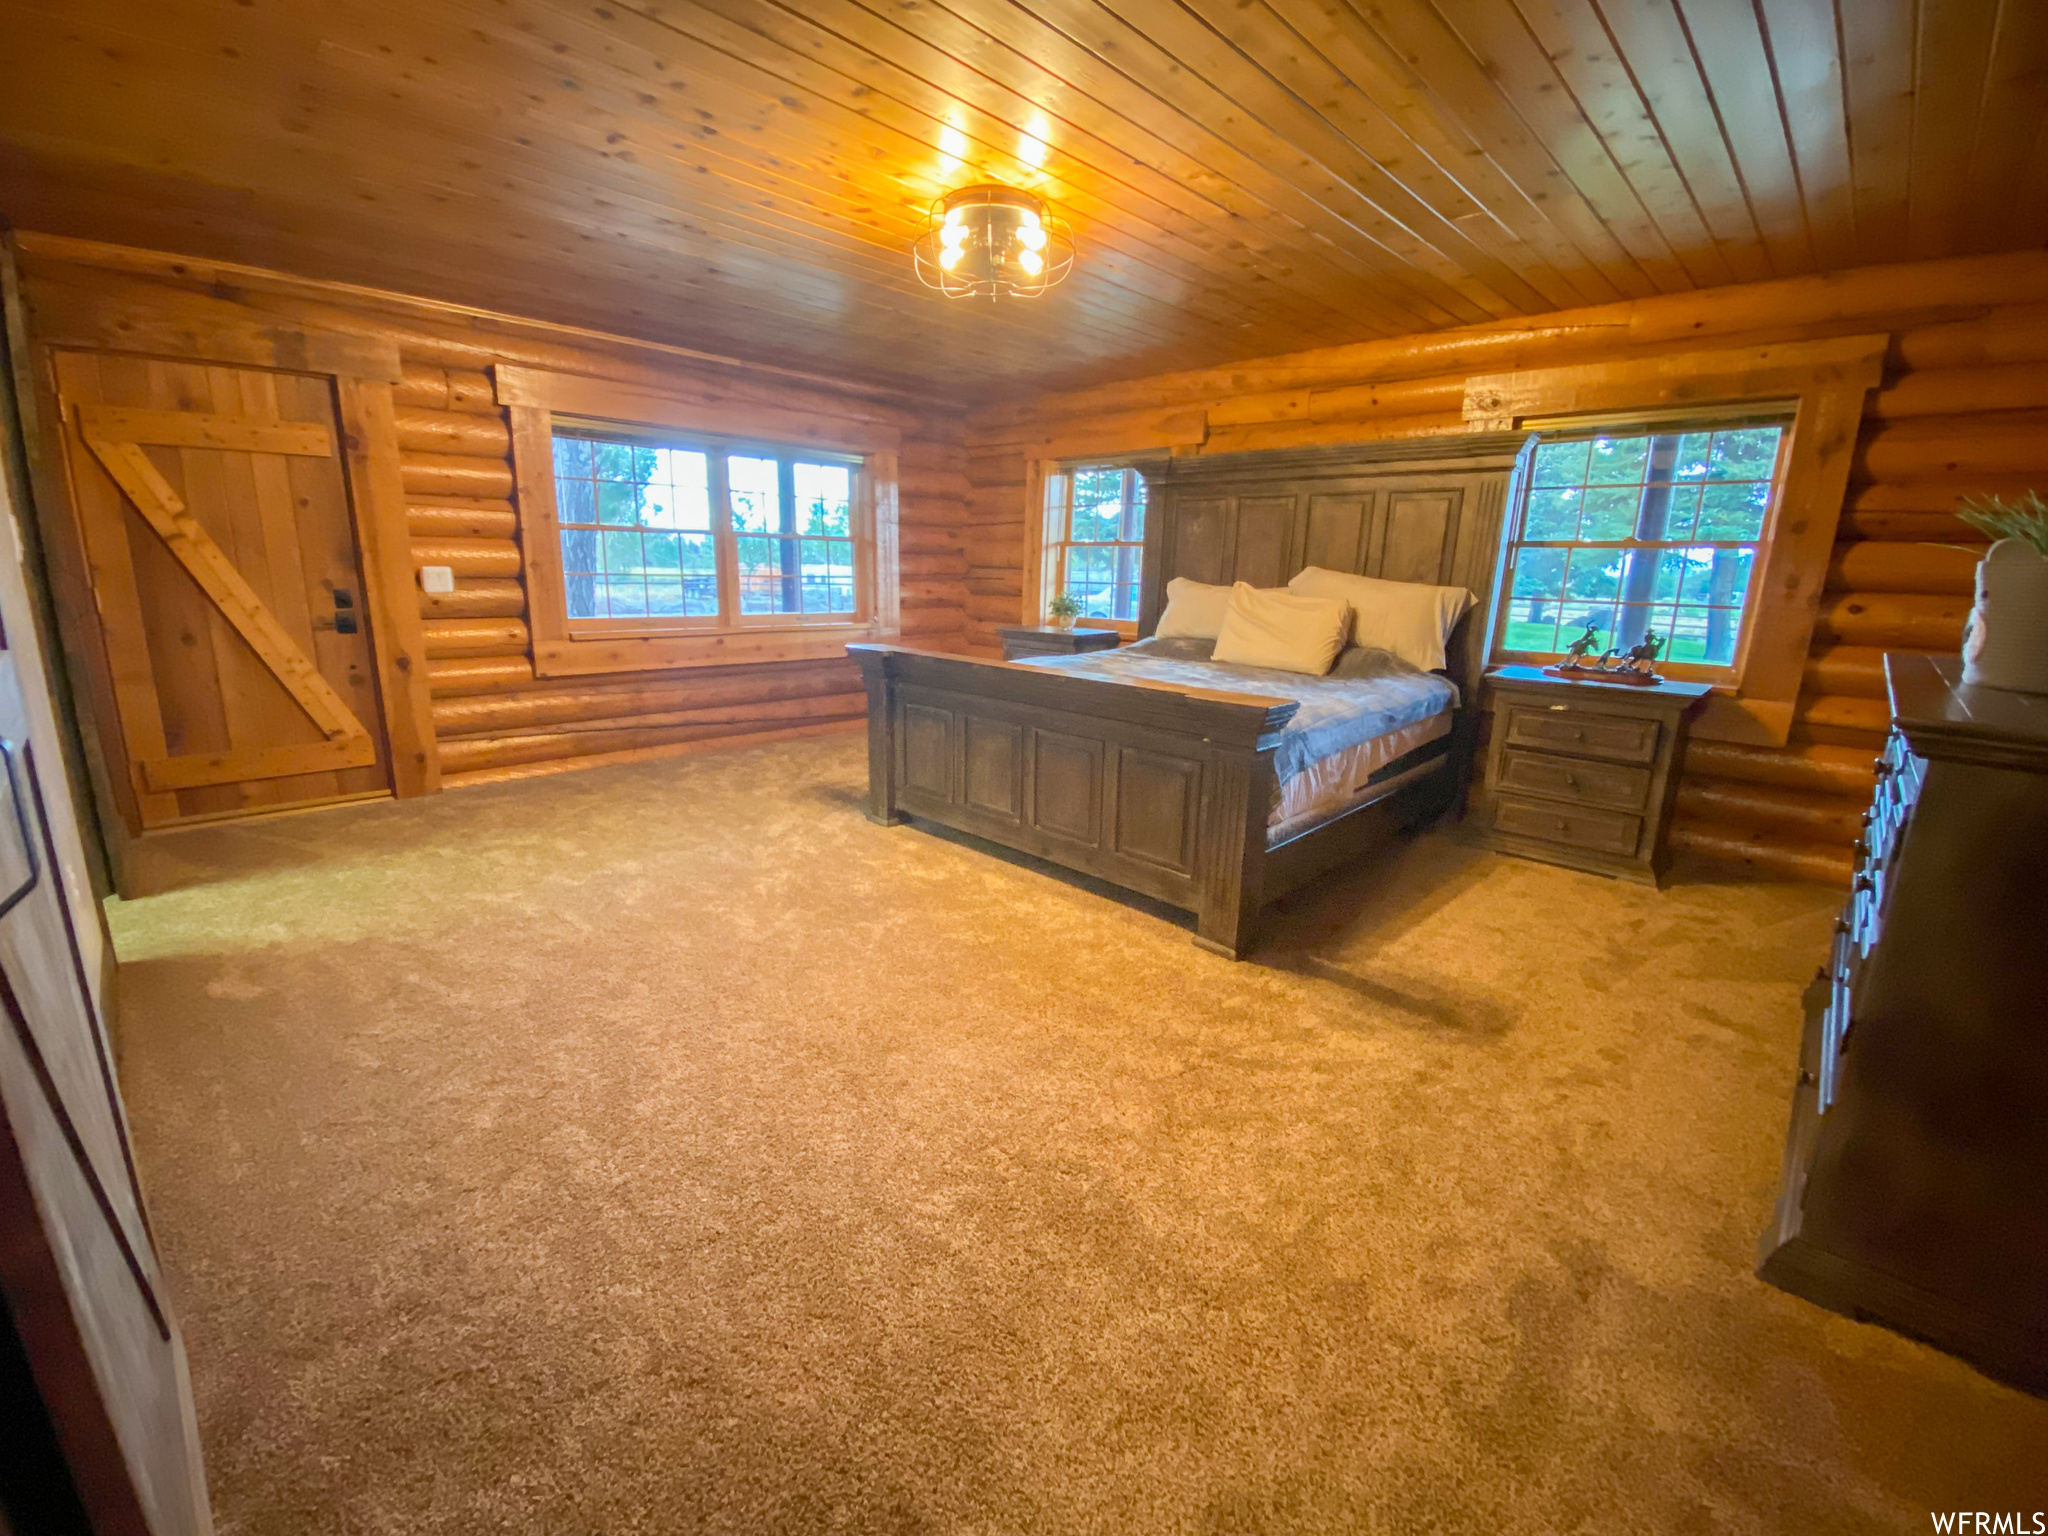 Carpeted bedroom with rustic walls, multiple windows, and wood ceiling